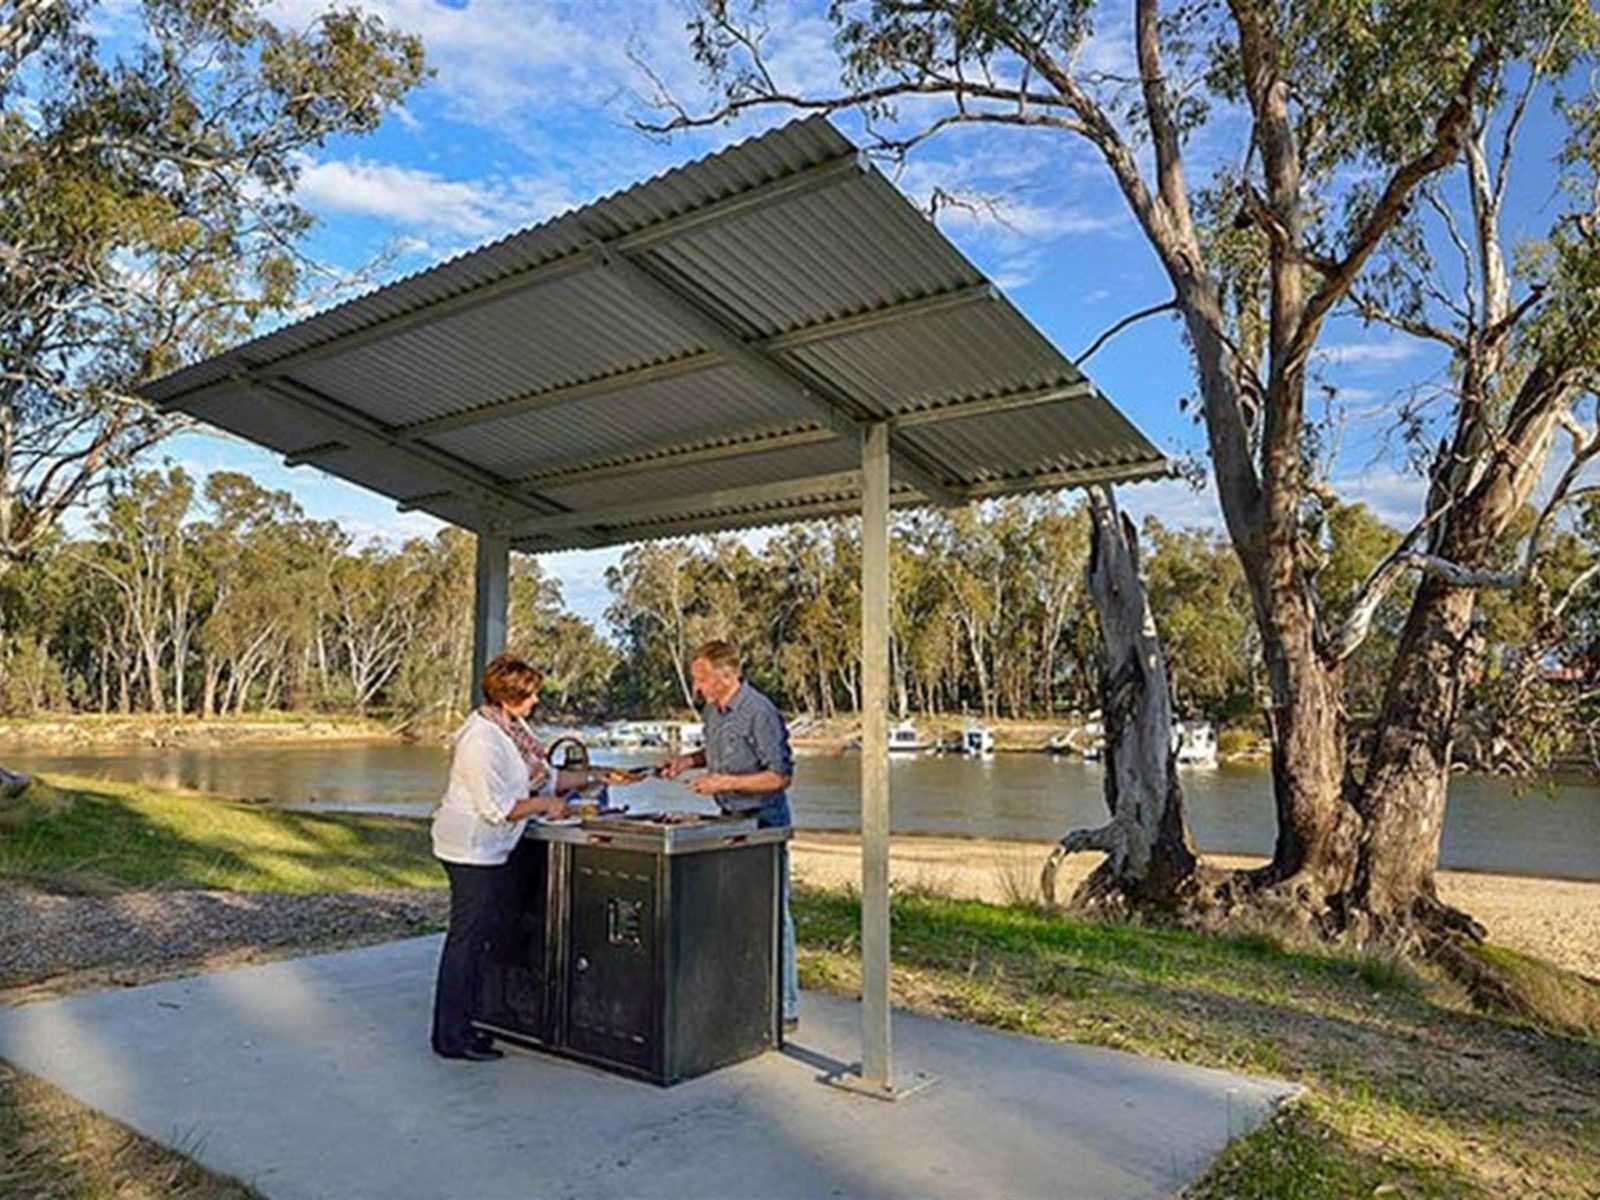 Two people at a barbecue shelter at Ski Beach picnic area, Murray Valley National Park. Photo: Gavin